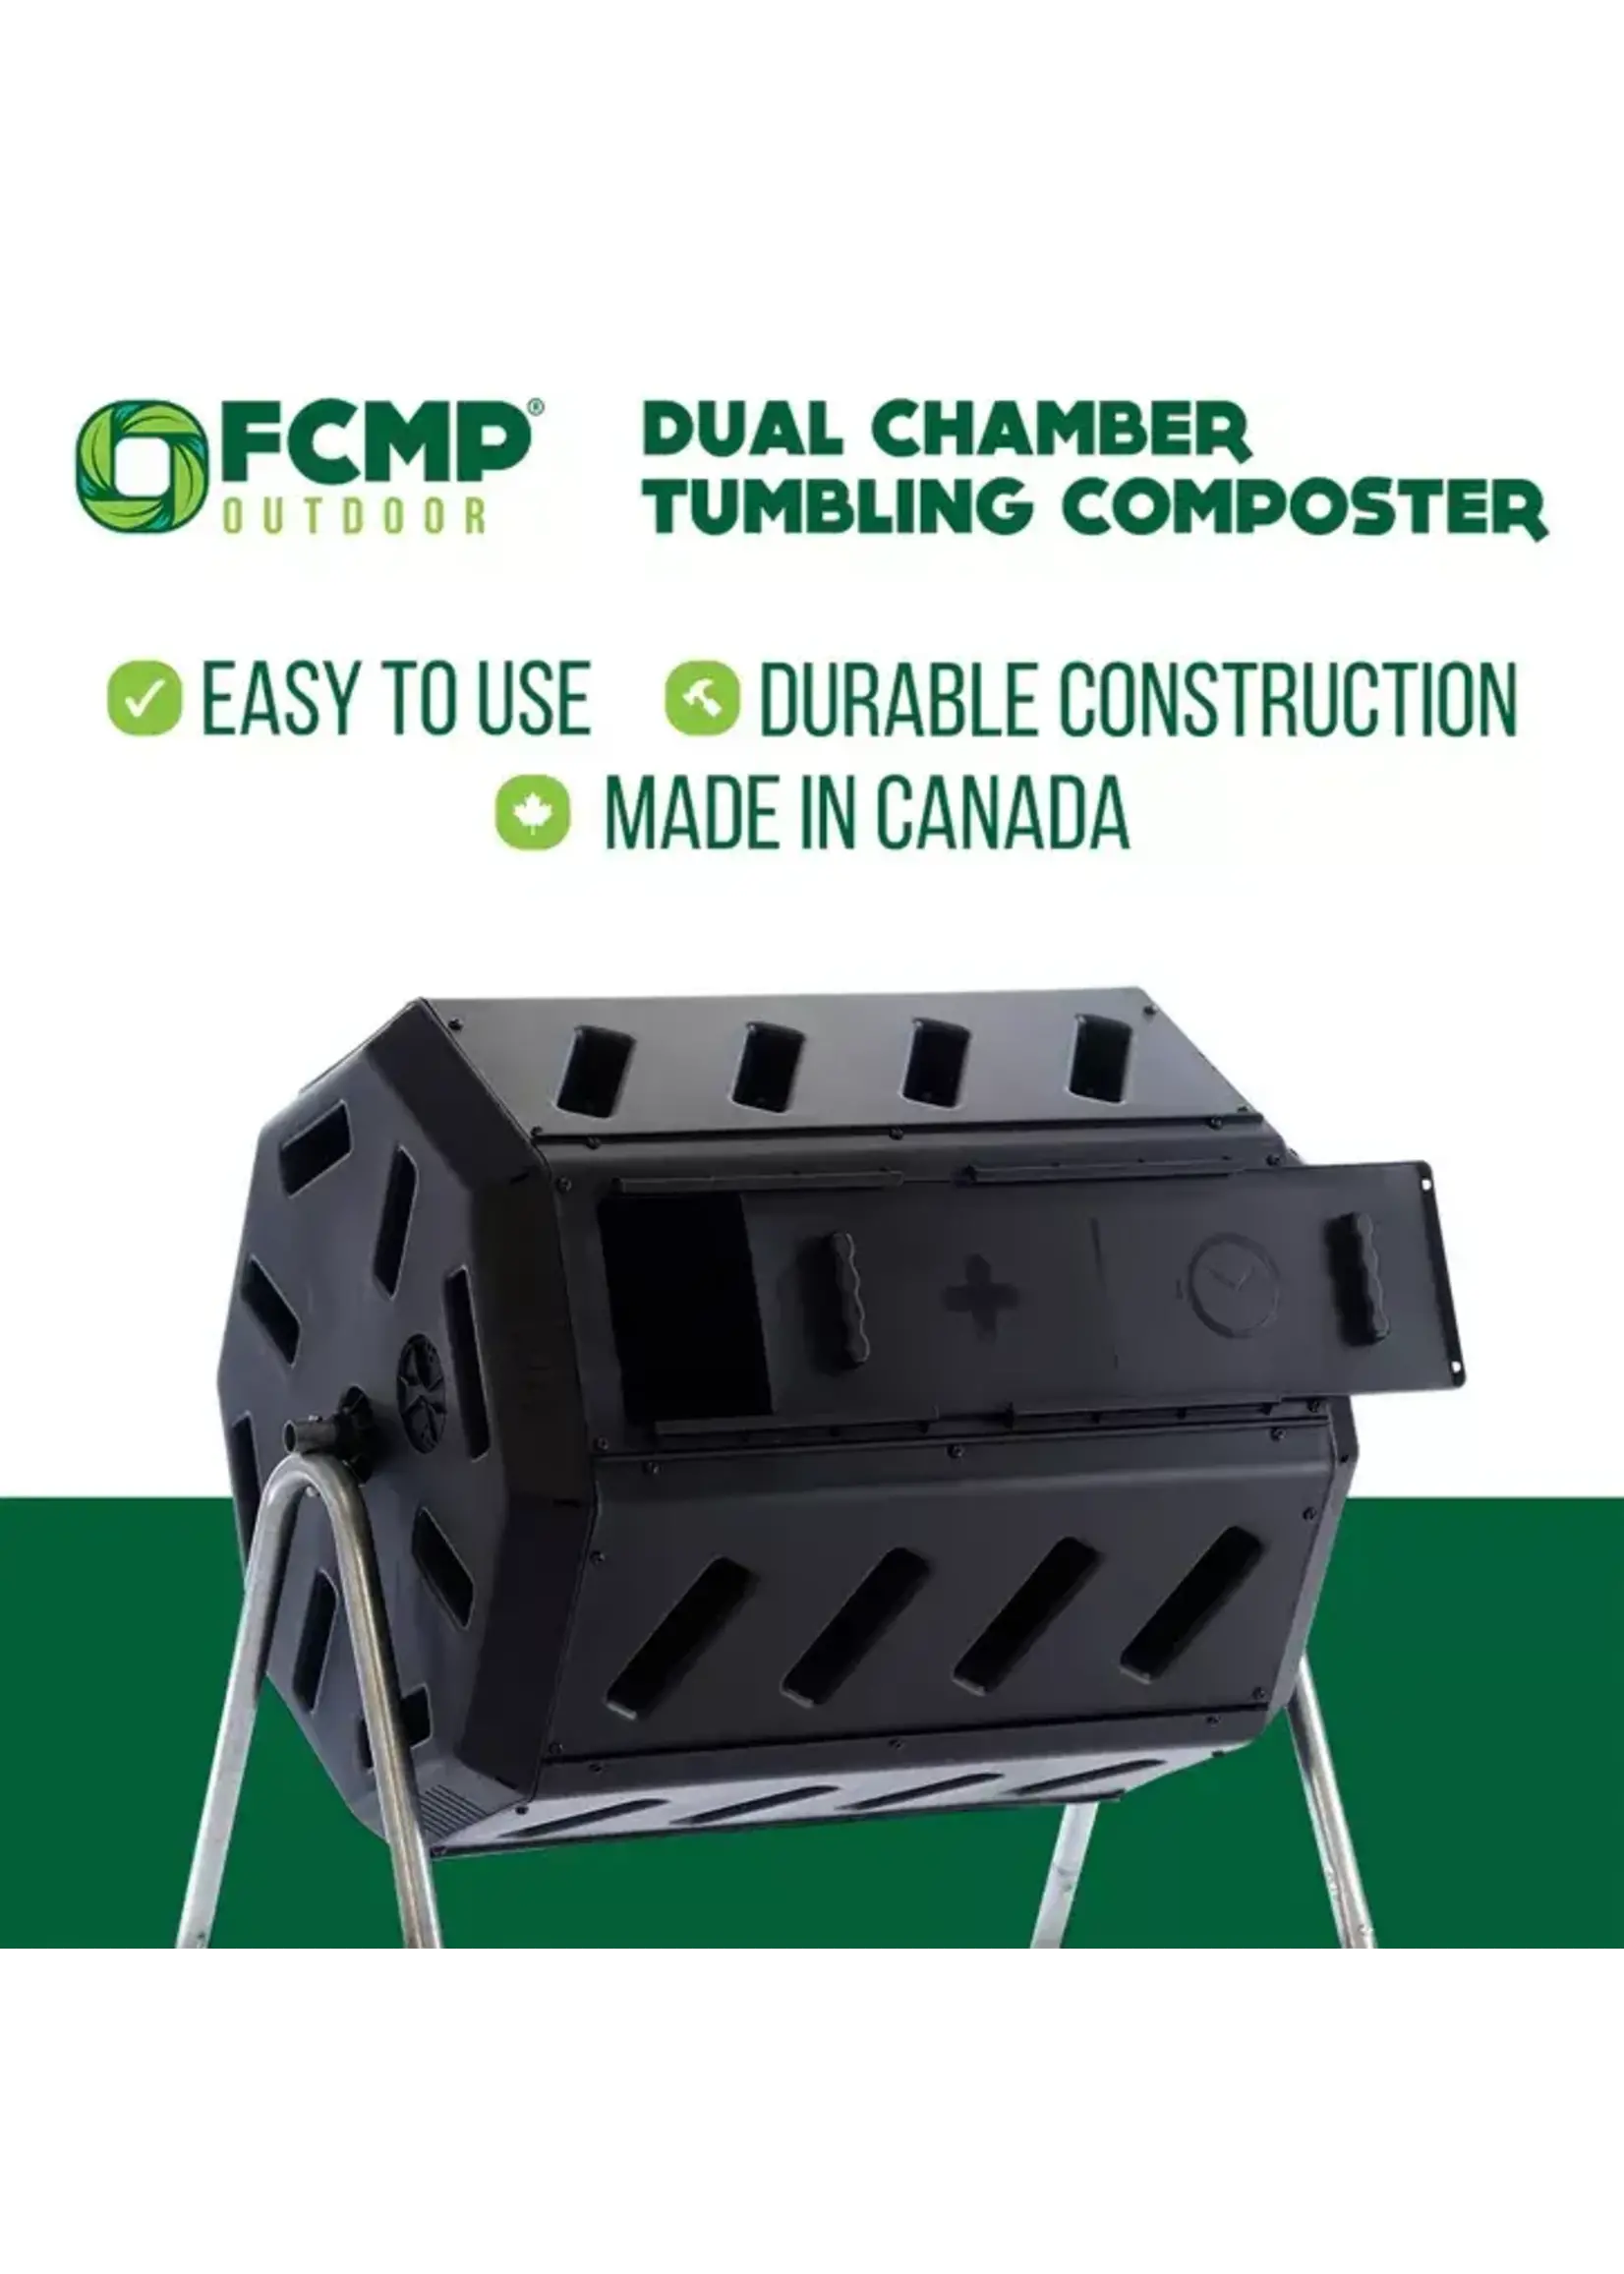 FCMP Outdoor IM4000 37 Gallon 8 Sided Plastic Dual Chamber Tumbling Composter Outdoor Elevated Rotating Garden Compost Bin, Black